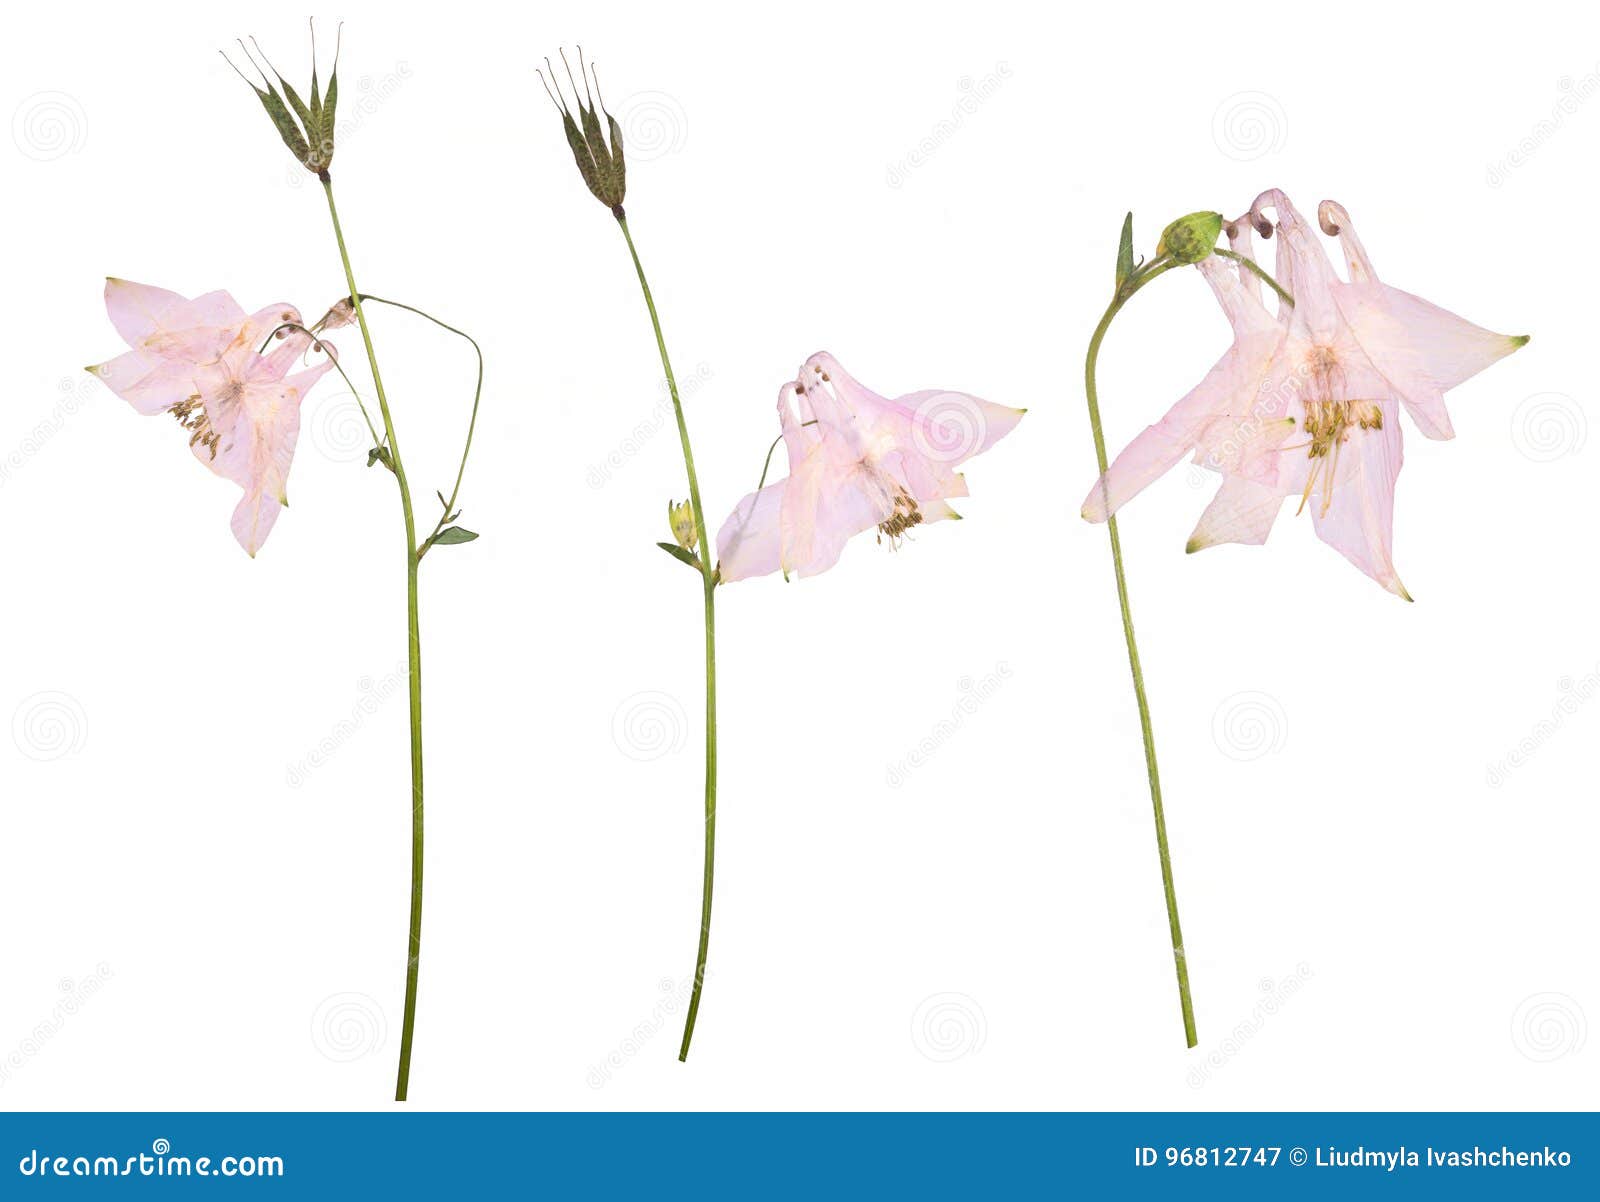 Pressed Dried Pink Flowers Scanned Image Stock Photo 551337496